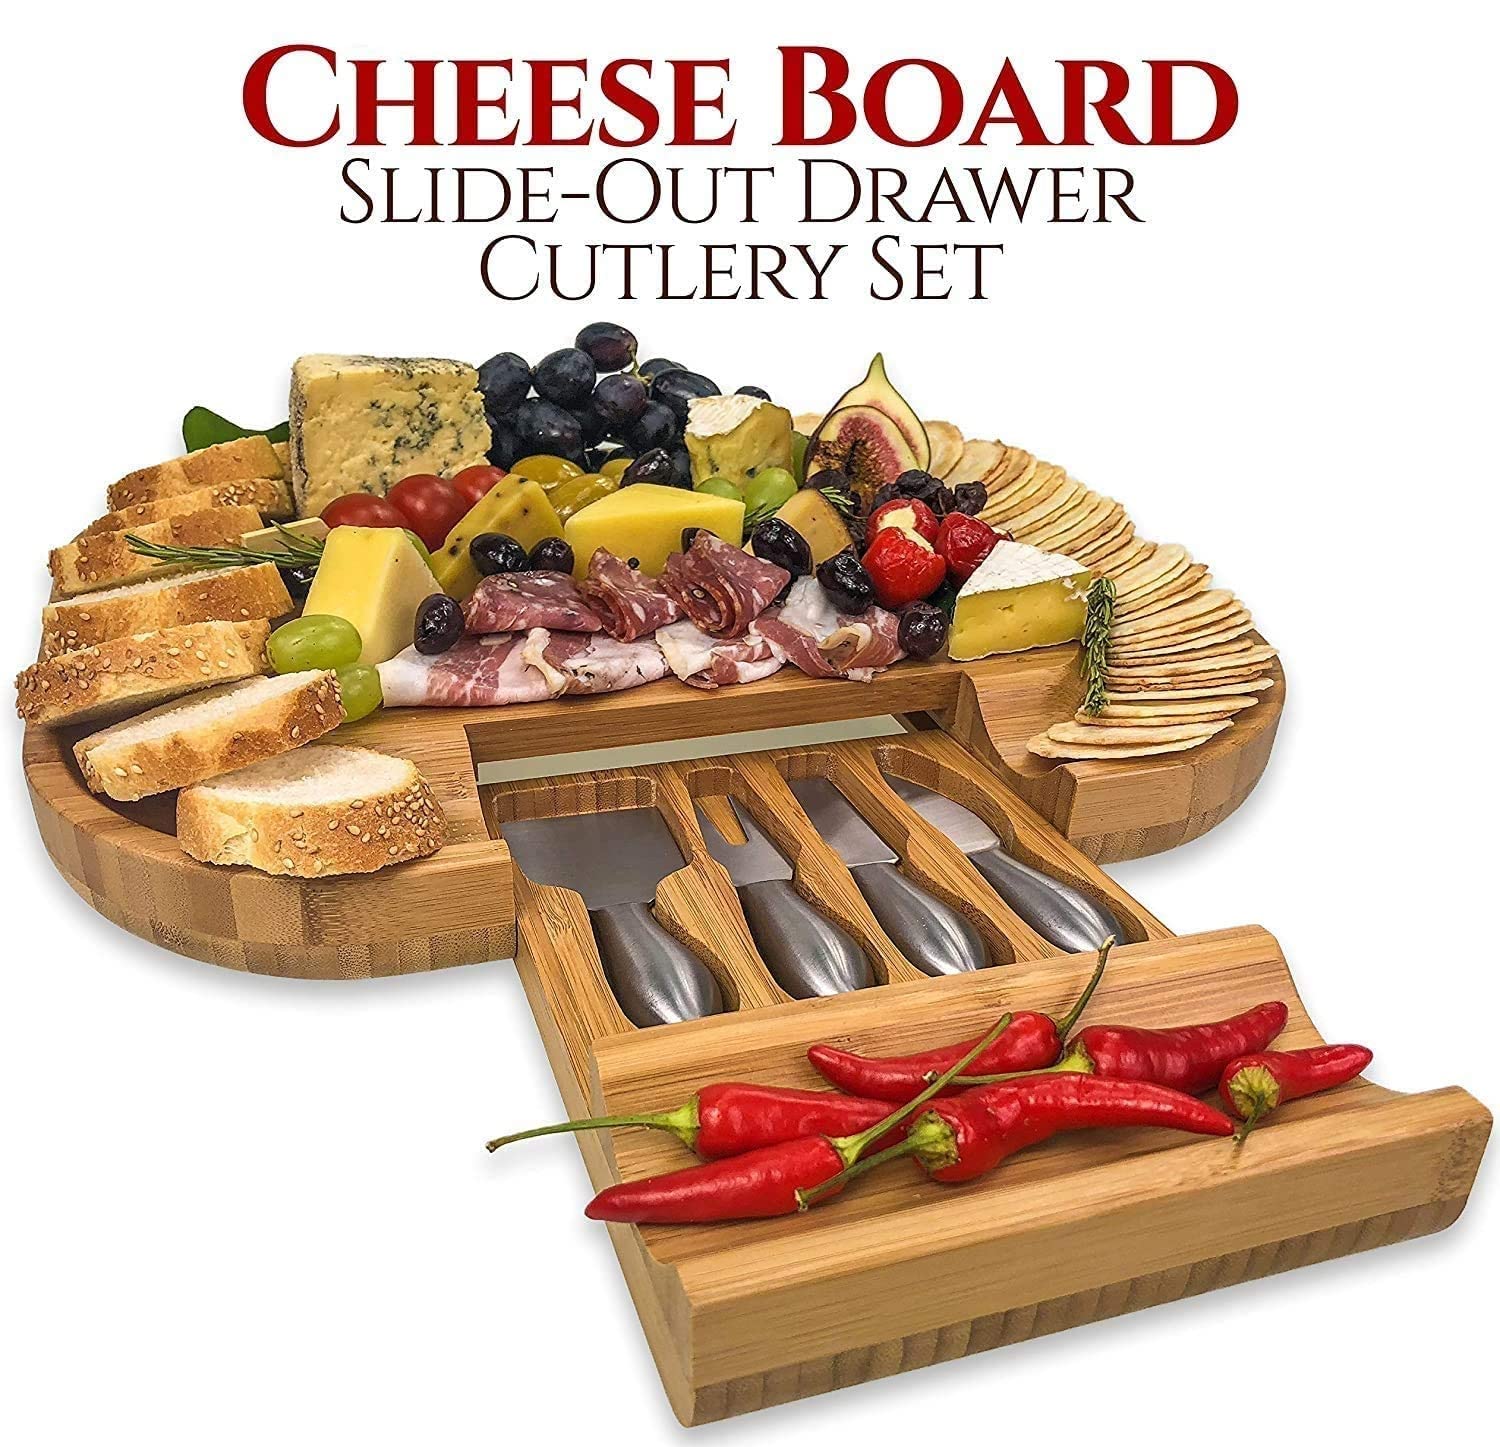 Solander Skelf Large Cheese Board and Knife Set - Stylish Charcuterie Board Set, Bamboo Housewarming Gifts New Home, Birthday Gifts for Women, or Wedding Gifts for Couples